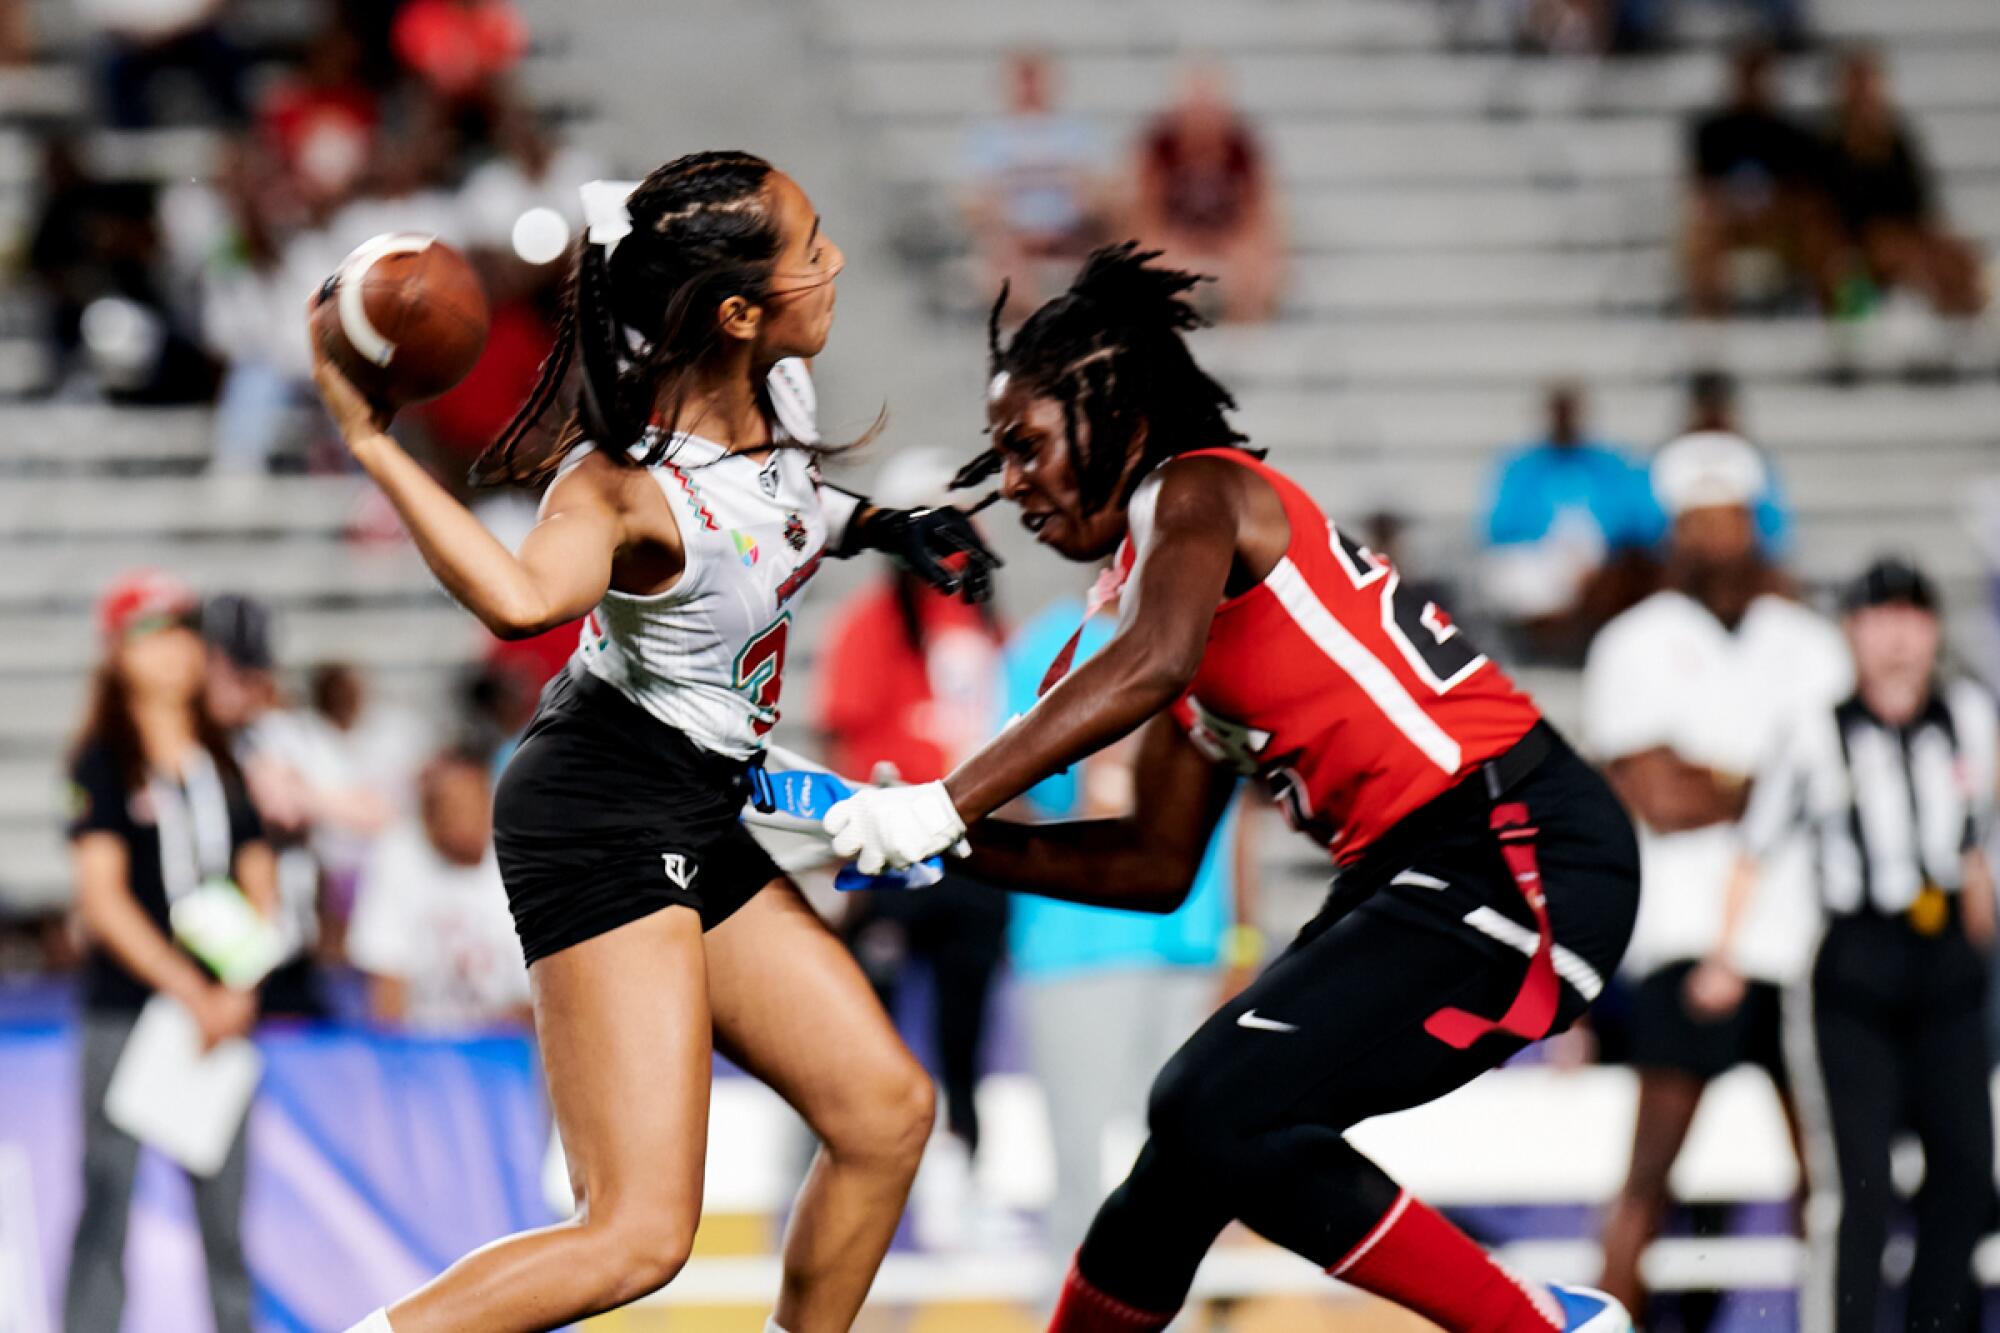 Mexico's Diana Flores throws the ball during a flag football tournament at World Games 2022.